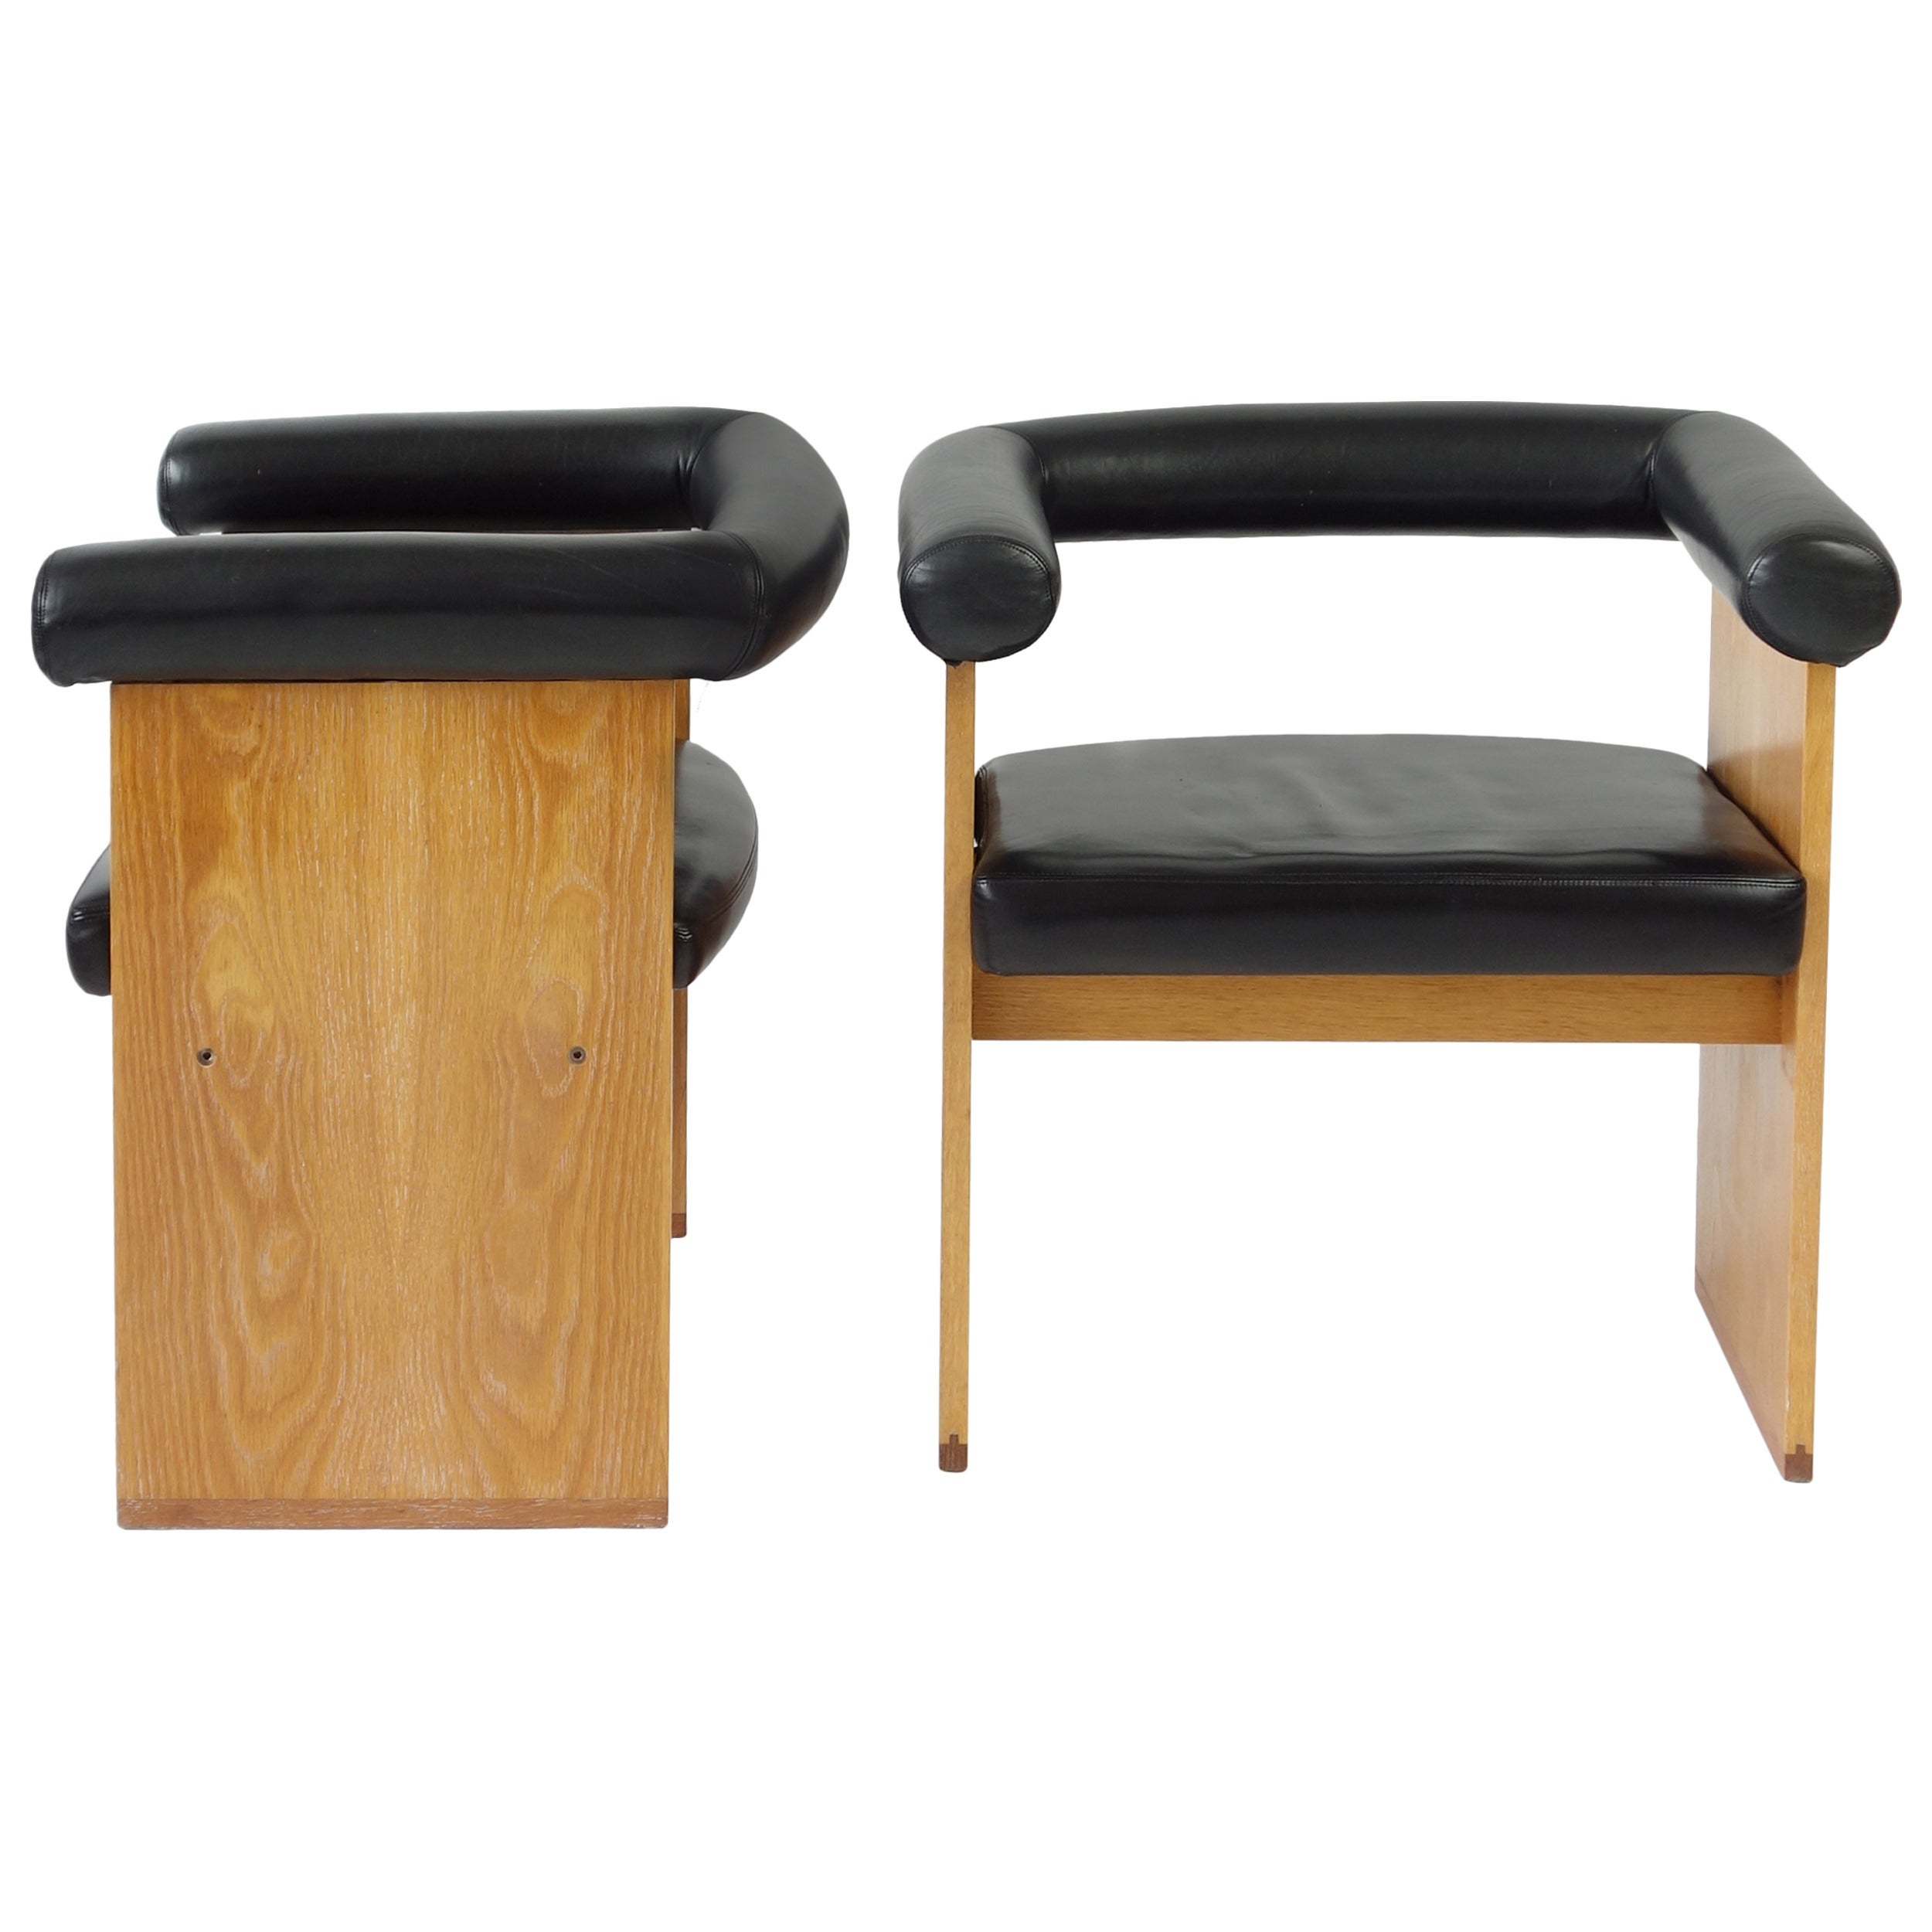 Pair of Leather and Limed Oak Minimalist Armchairs